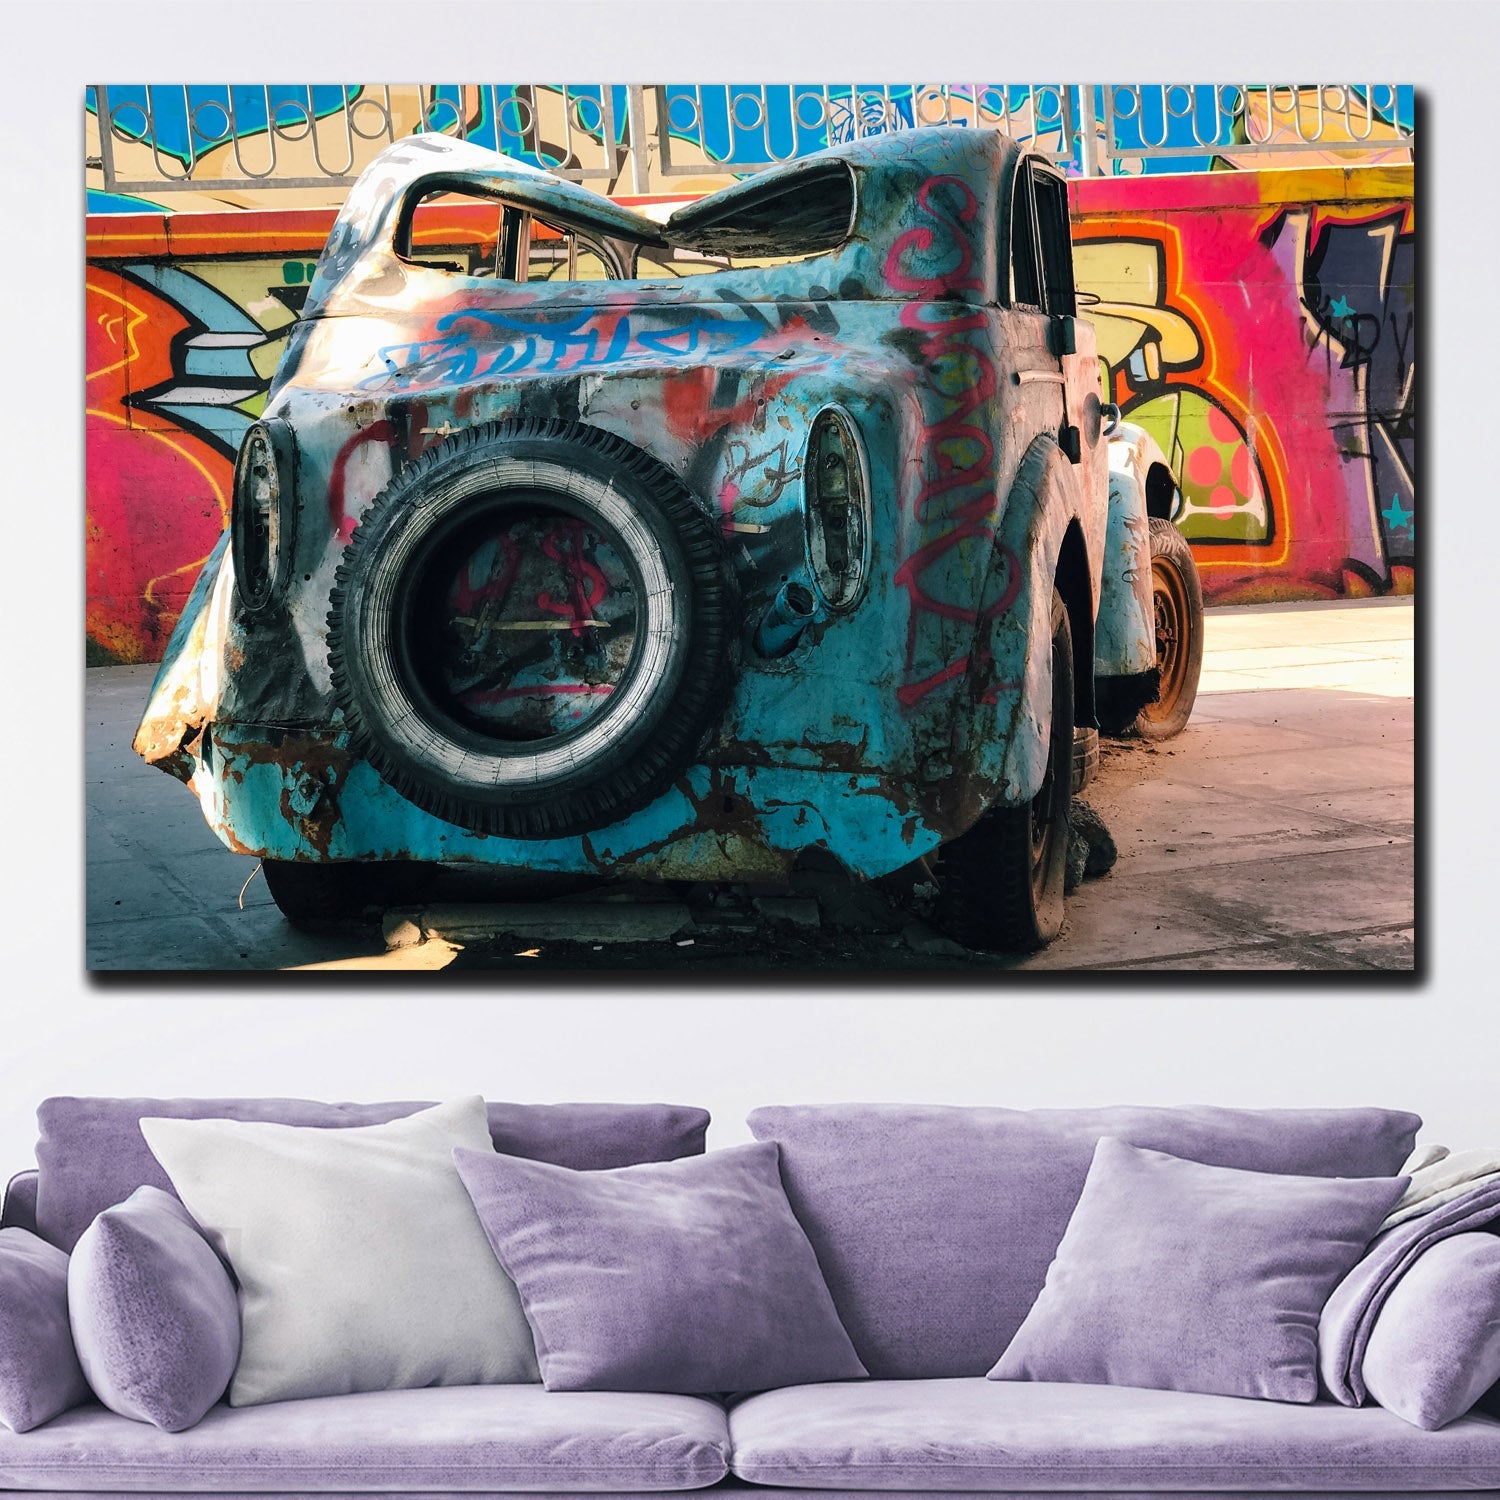 https://cdn.shopify.com/s/files/1/0387/9986/8044/products/OldStreetCarCanvasArtprintStretched-3.jpg